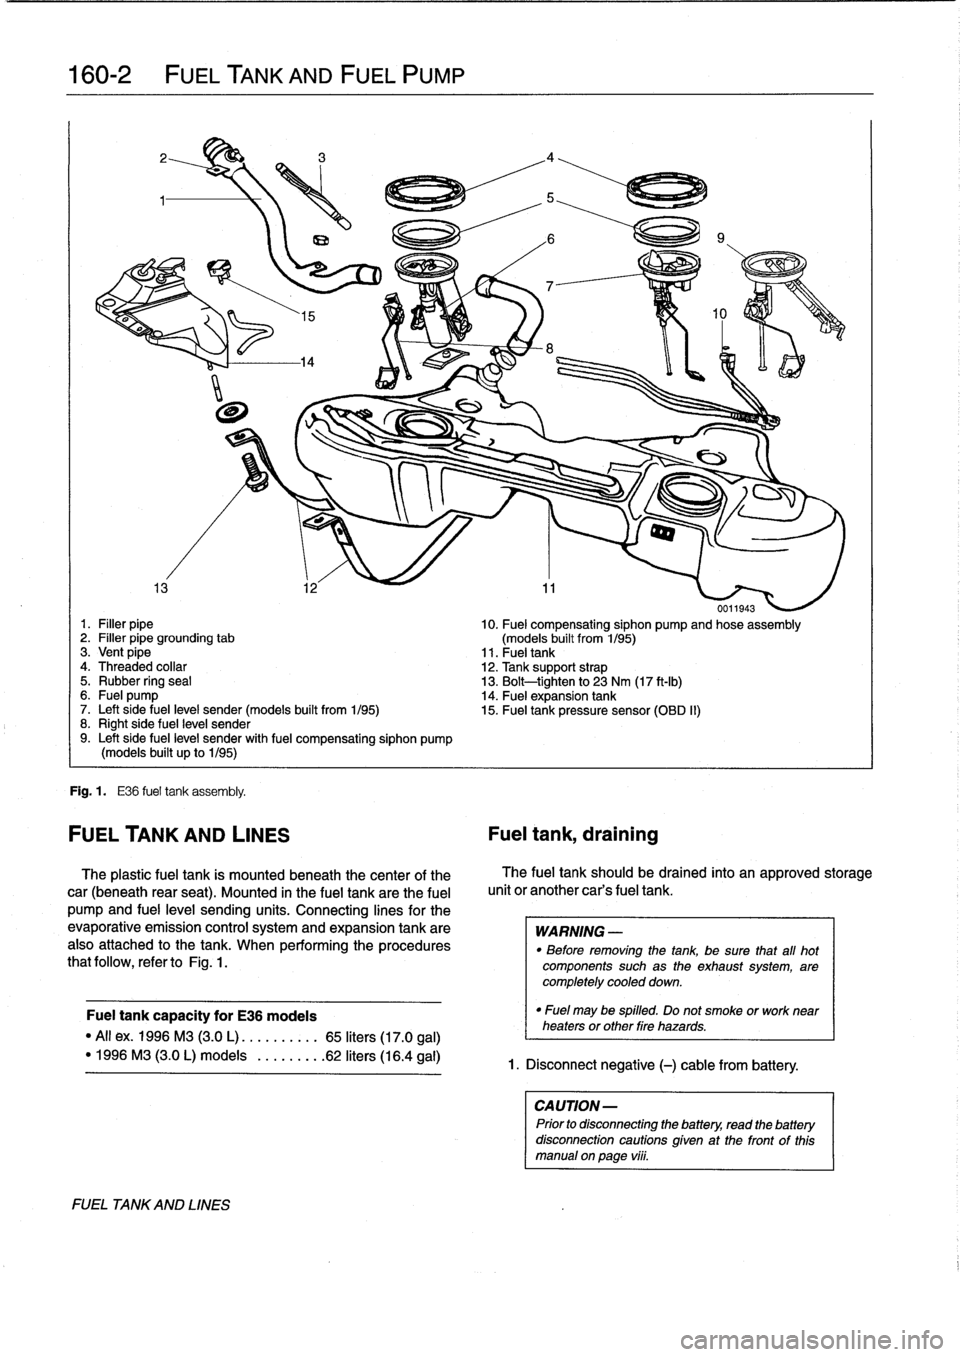 BMW 325i 1994 E36 Workshop Manual 
160-2

	

FUEL
TANK
AND
FUEL
PUMP

0011943
1
.
Filler
pipe

	

10
.
Fuel
compensating
siphon
pump
and
hose
assembly
2
.
Filler
pipe
grounding
tab

	

(models
built
from
1/95)
3
.
Vent
pipe

	

11
.
F